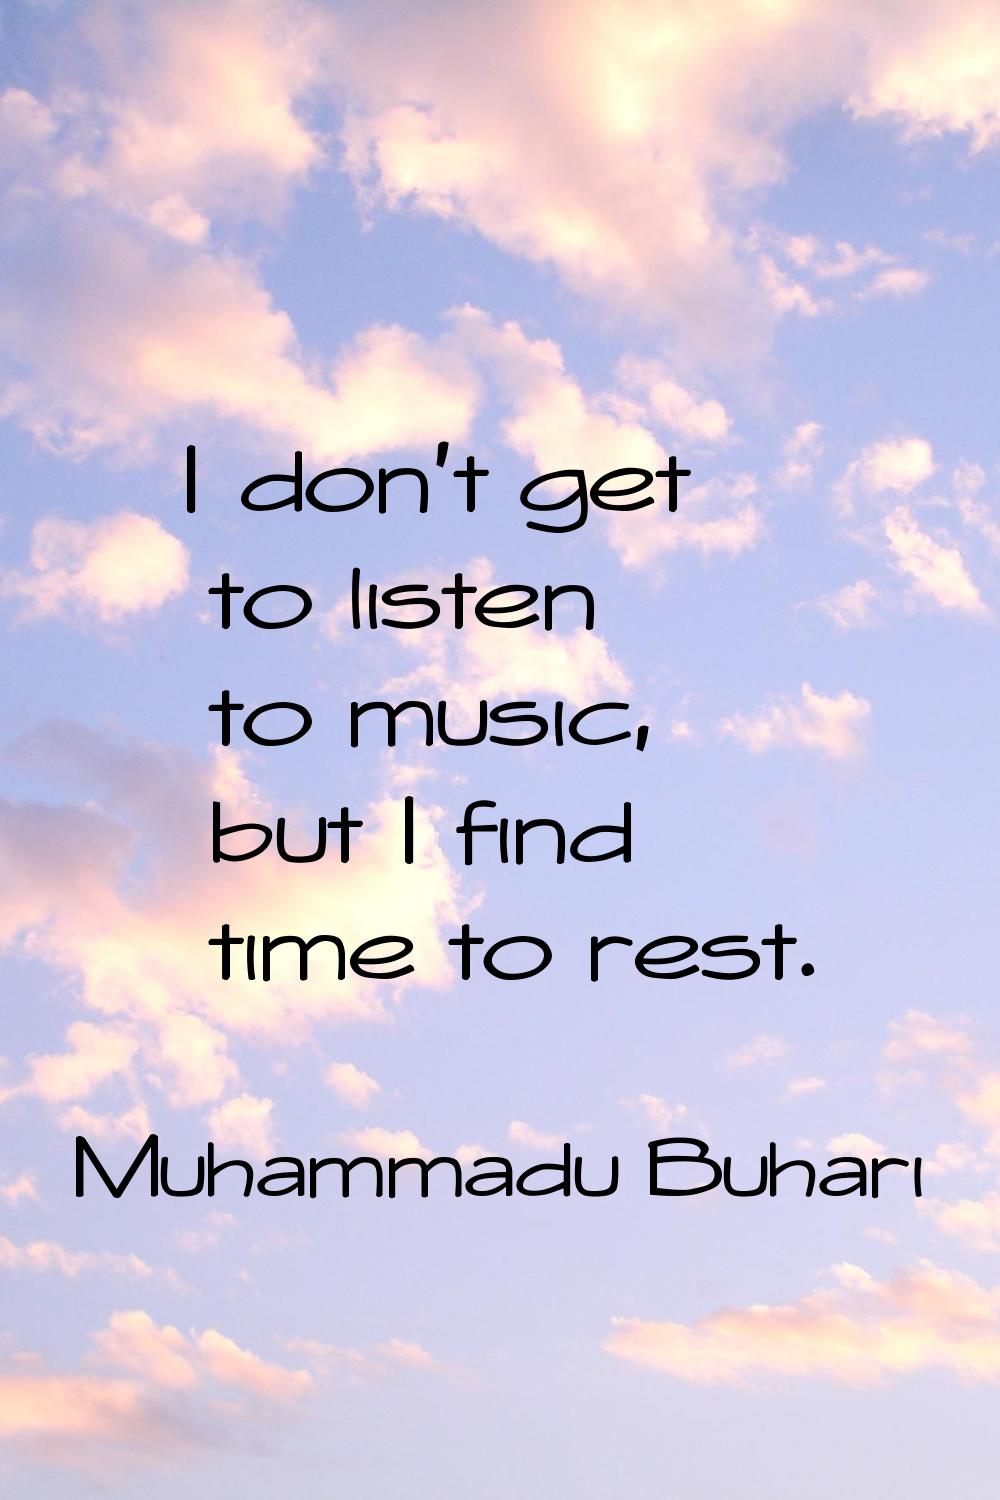 I don't get to listen to music, but I find time to rest.